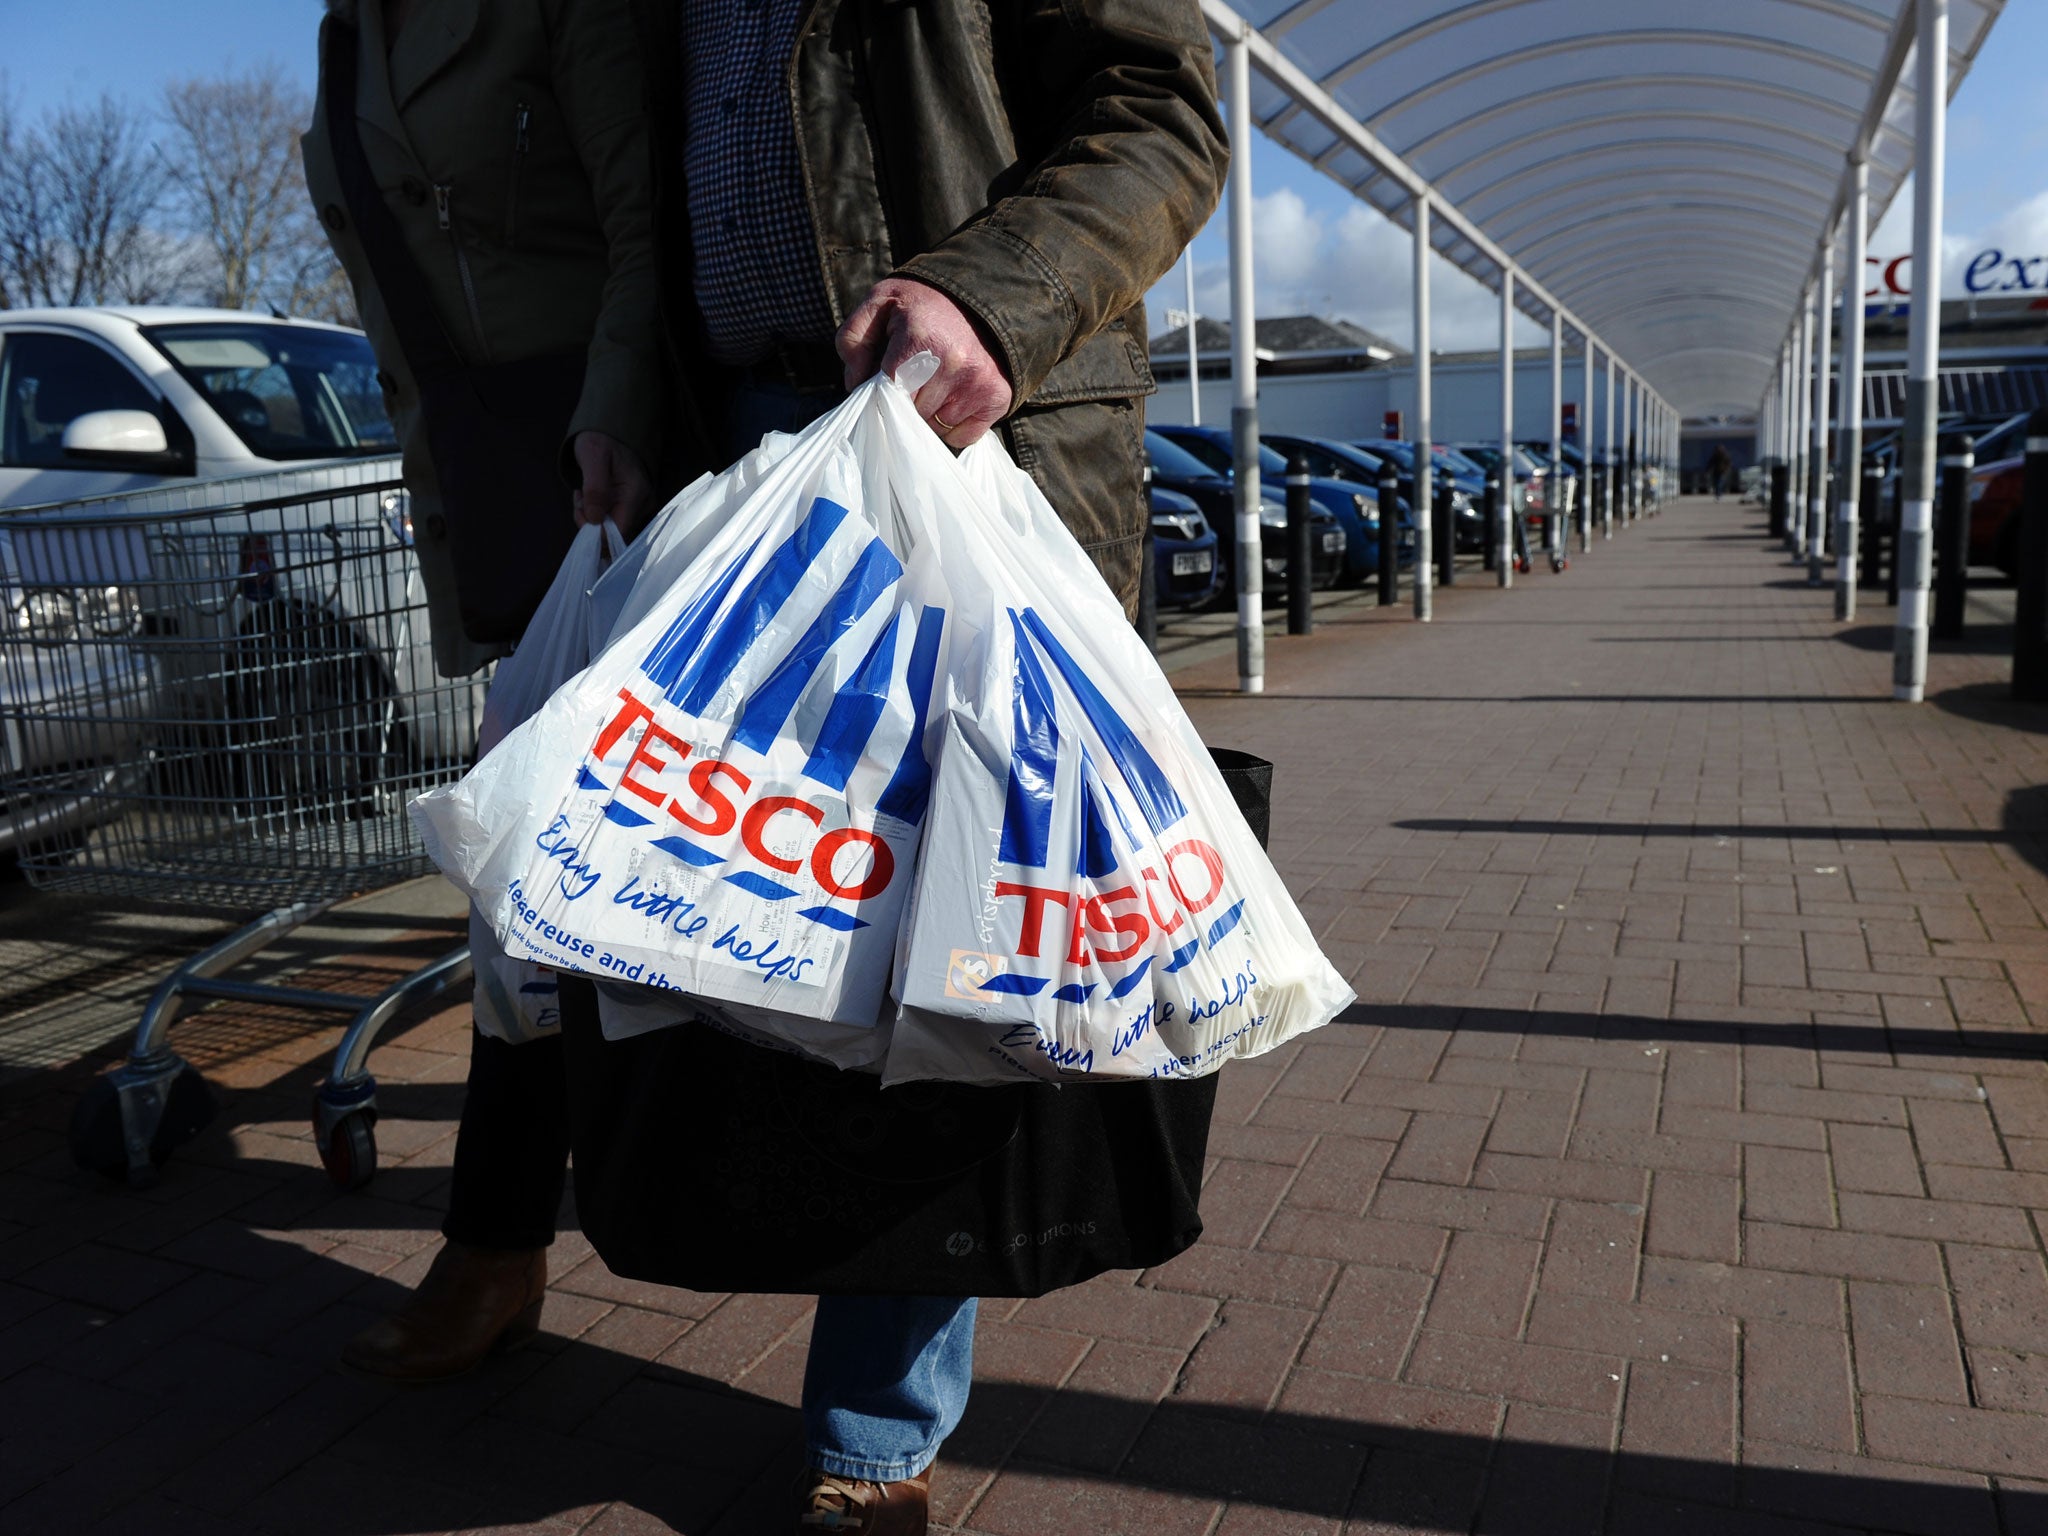 Tesco revealed first half group pre-tax profits of £1.39 billion, down 24.5 per cent year-on-year